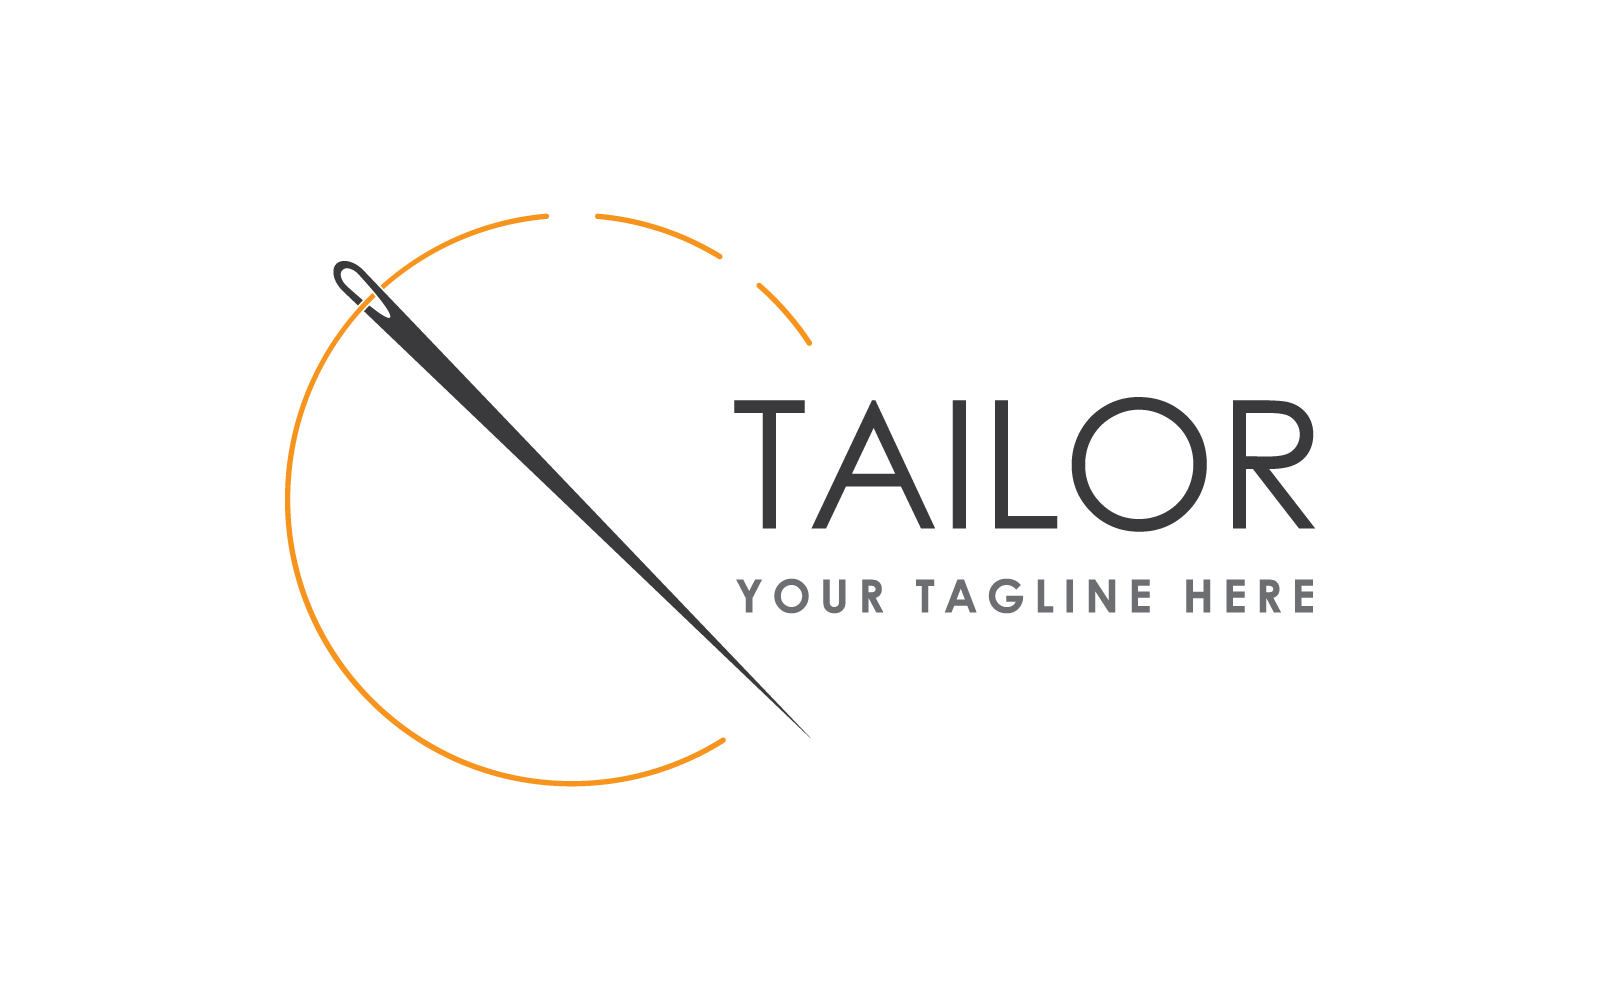 Tailor or textile logo illustration vector template